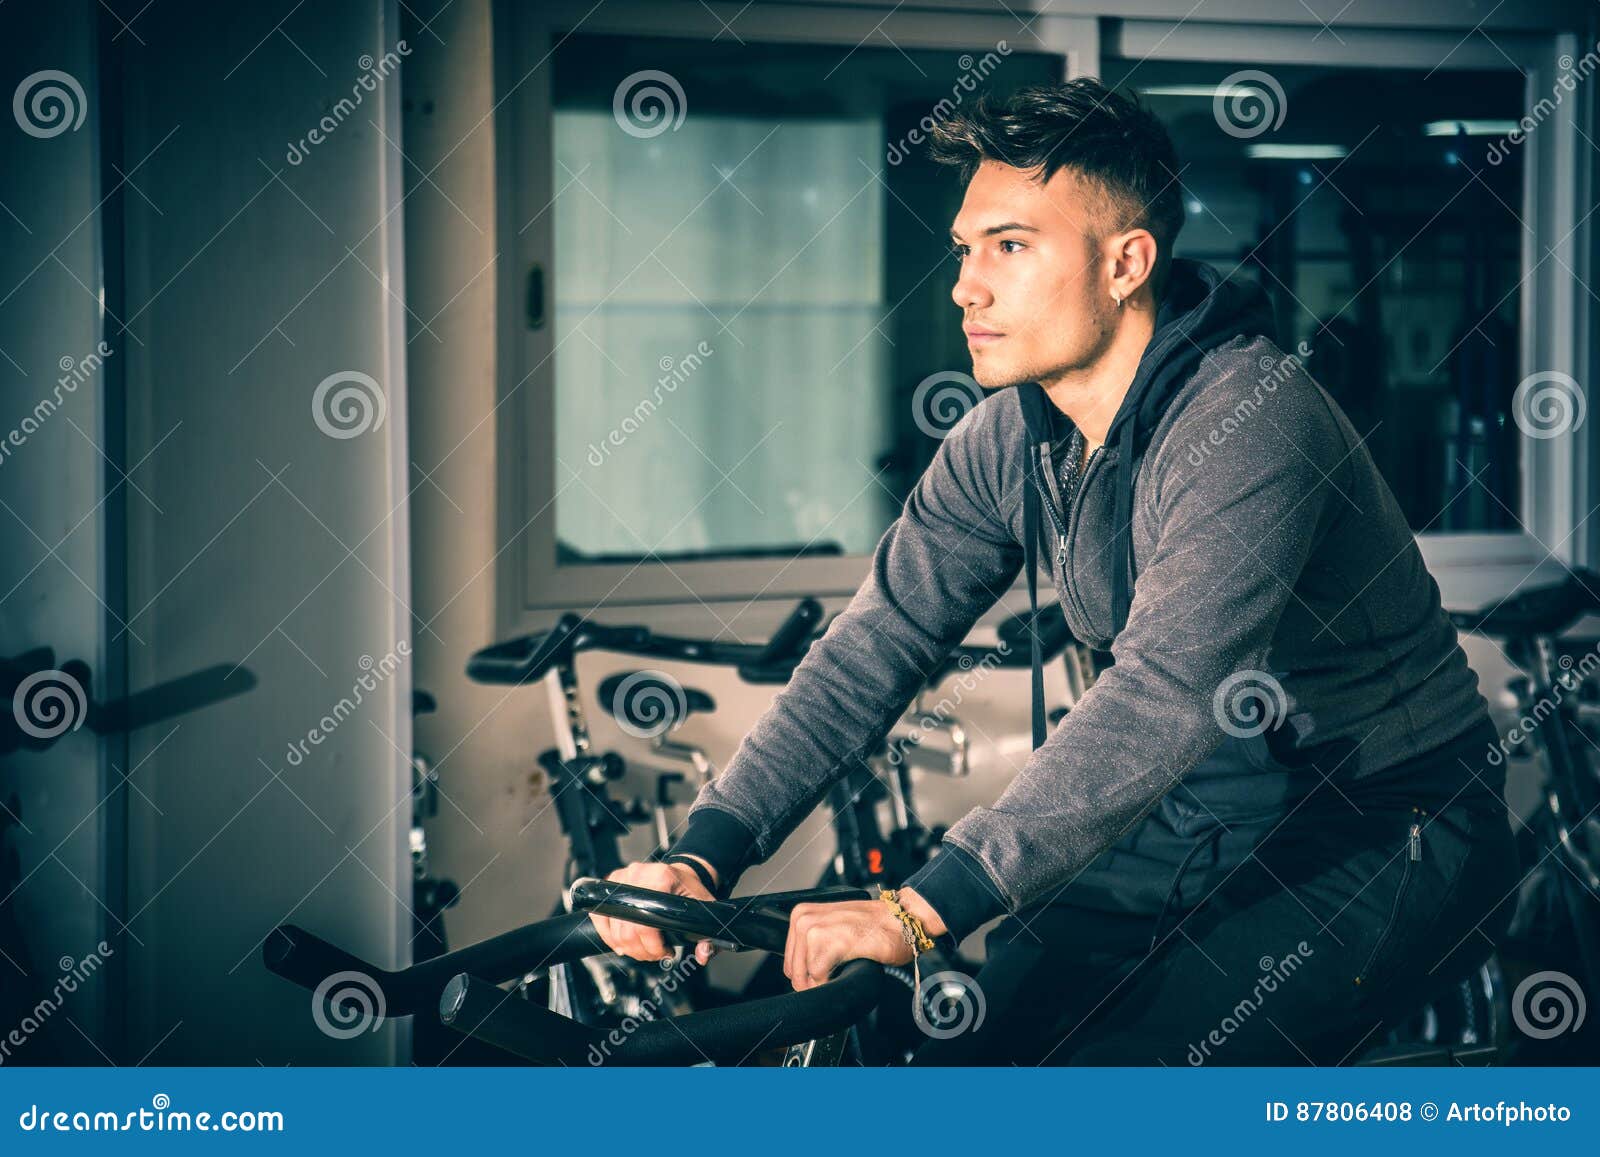 young man exercising in gym: spinning on stationary bike